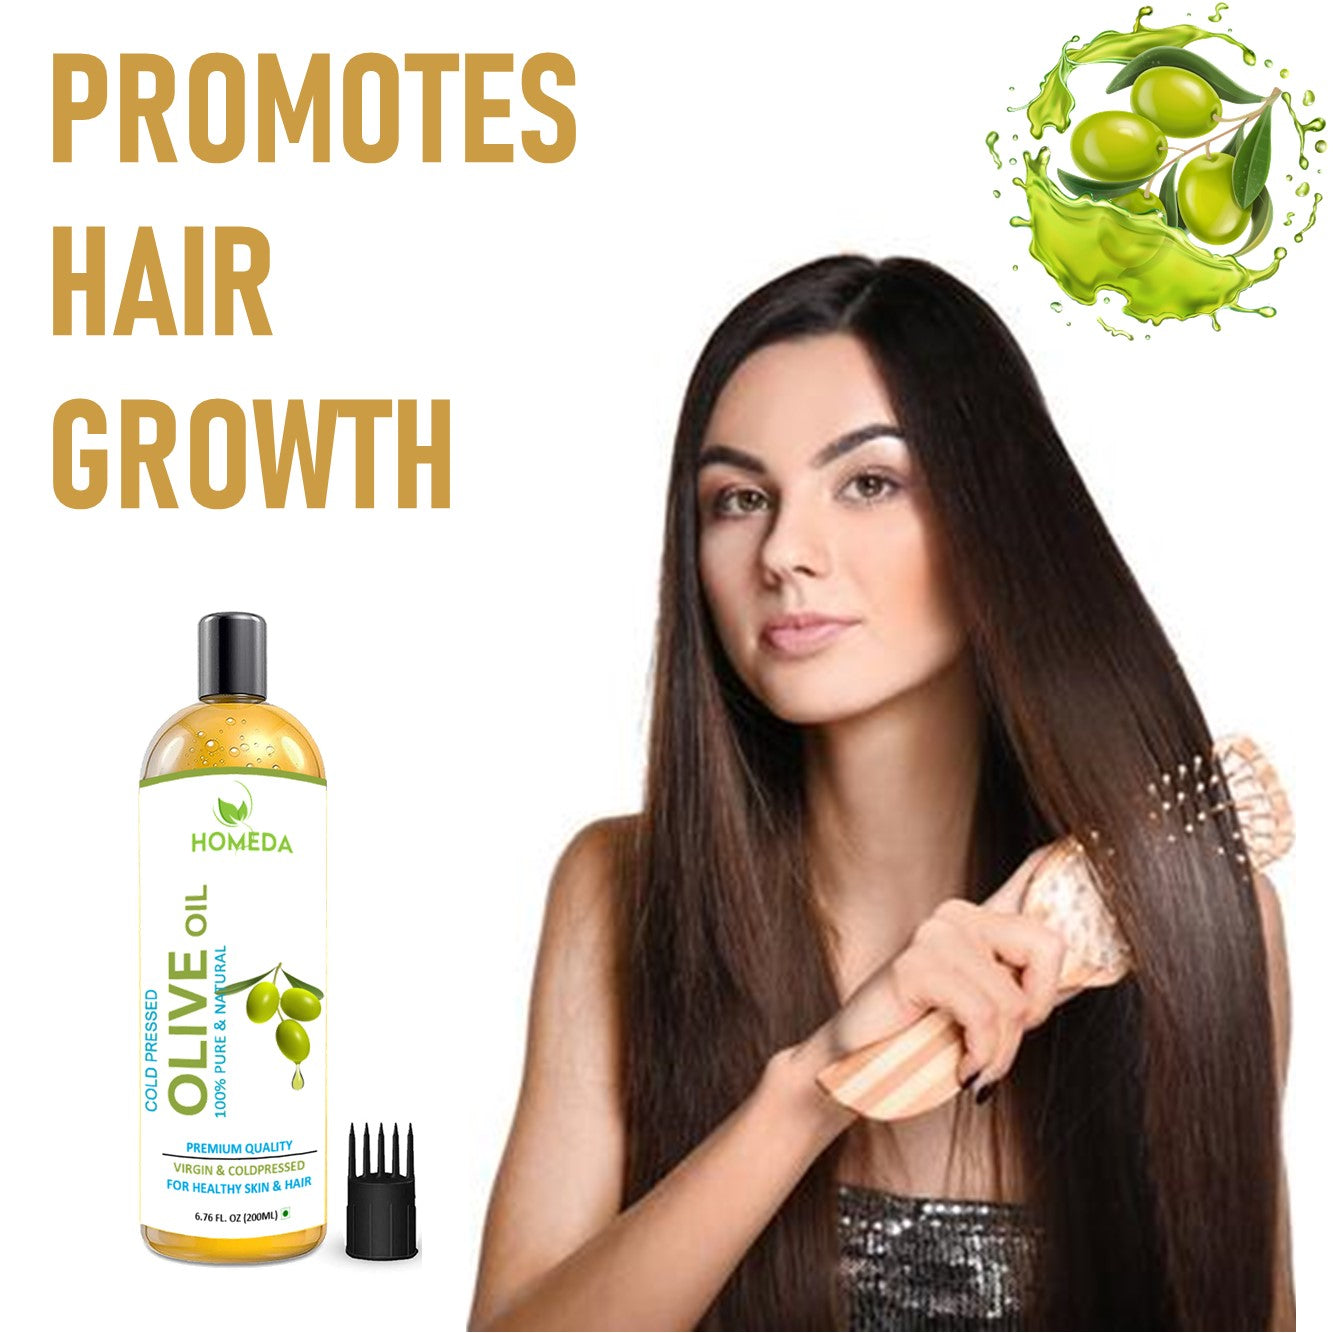 SPANISHA  100 natural olive oil from the best olives of Spain Spanisha  is here to serve the people of Bangladesh Haircare healthcare olive  oliveoil beautytips spa spain  Facebook